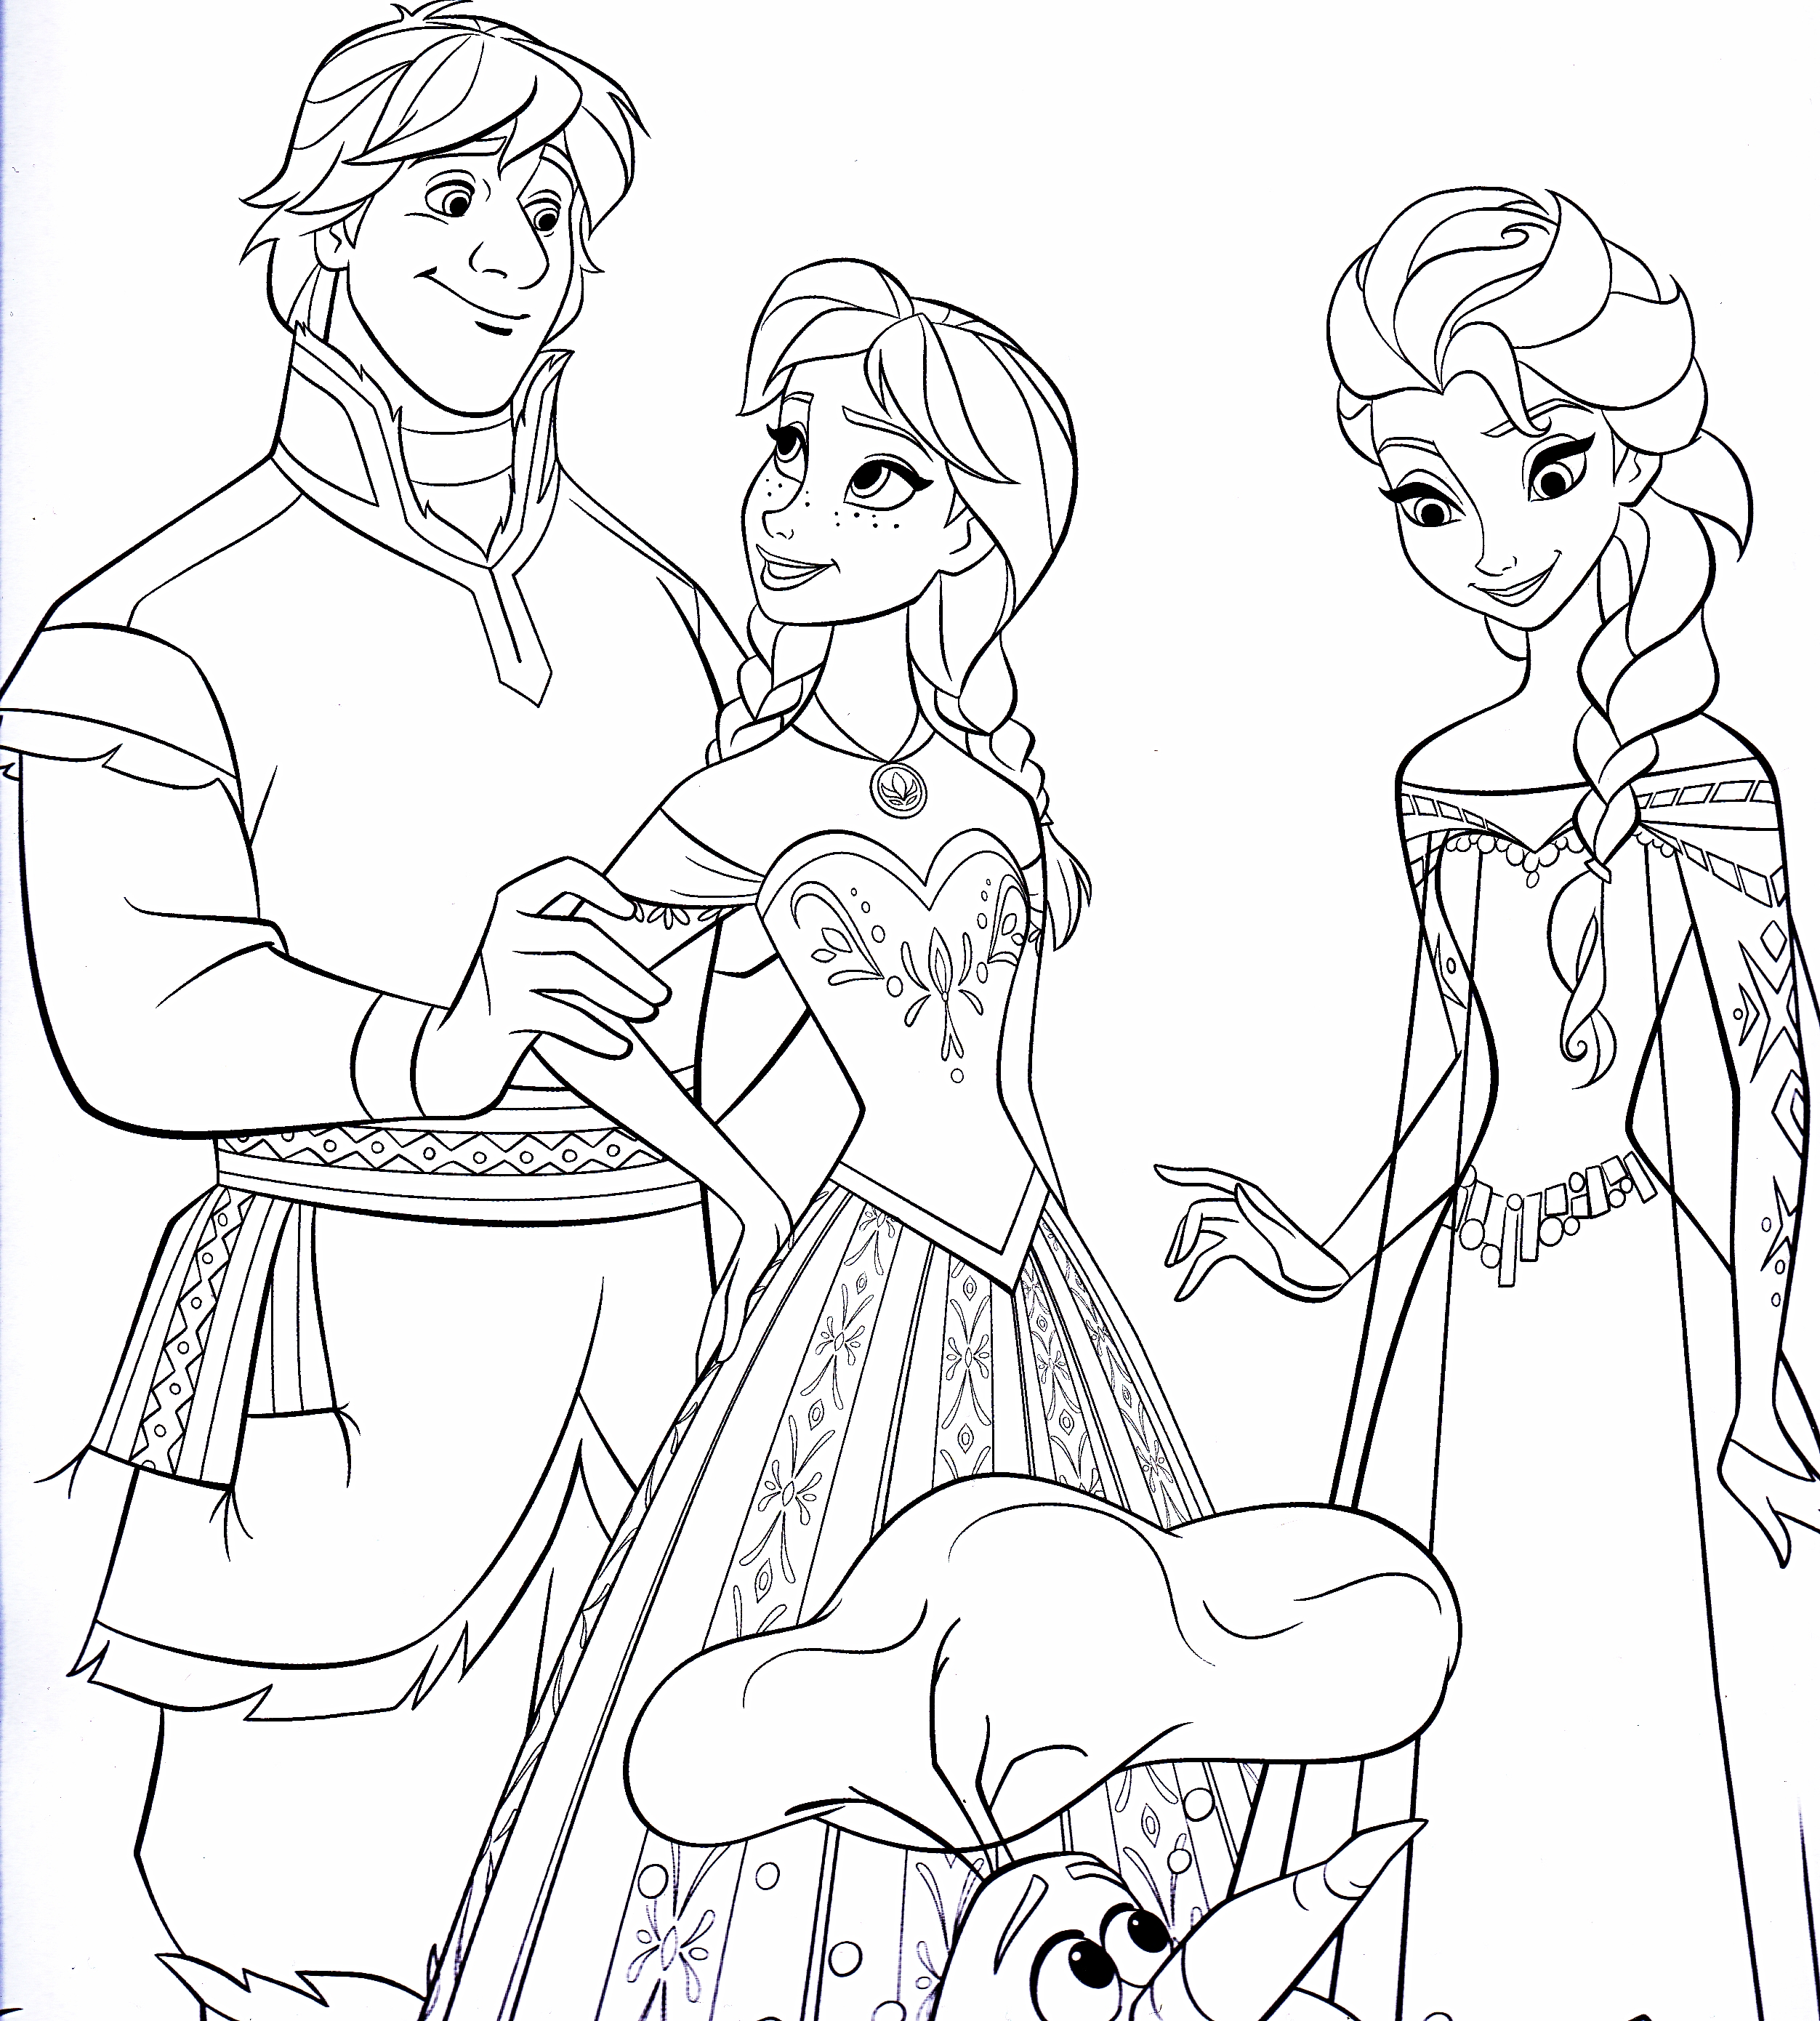 Disney’s Frozen Colouring Pages | Cute Kawaii Resources